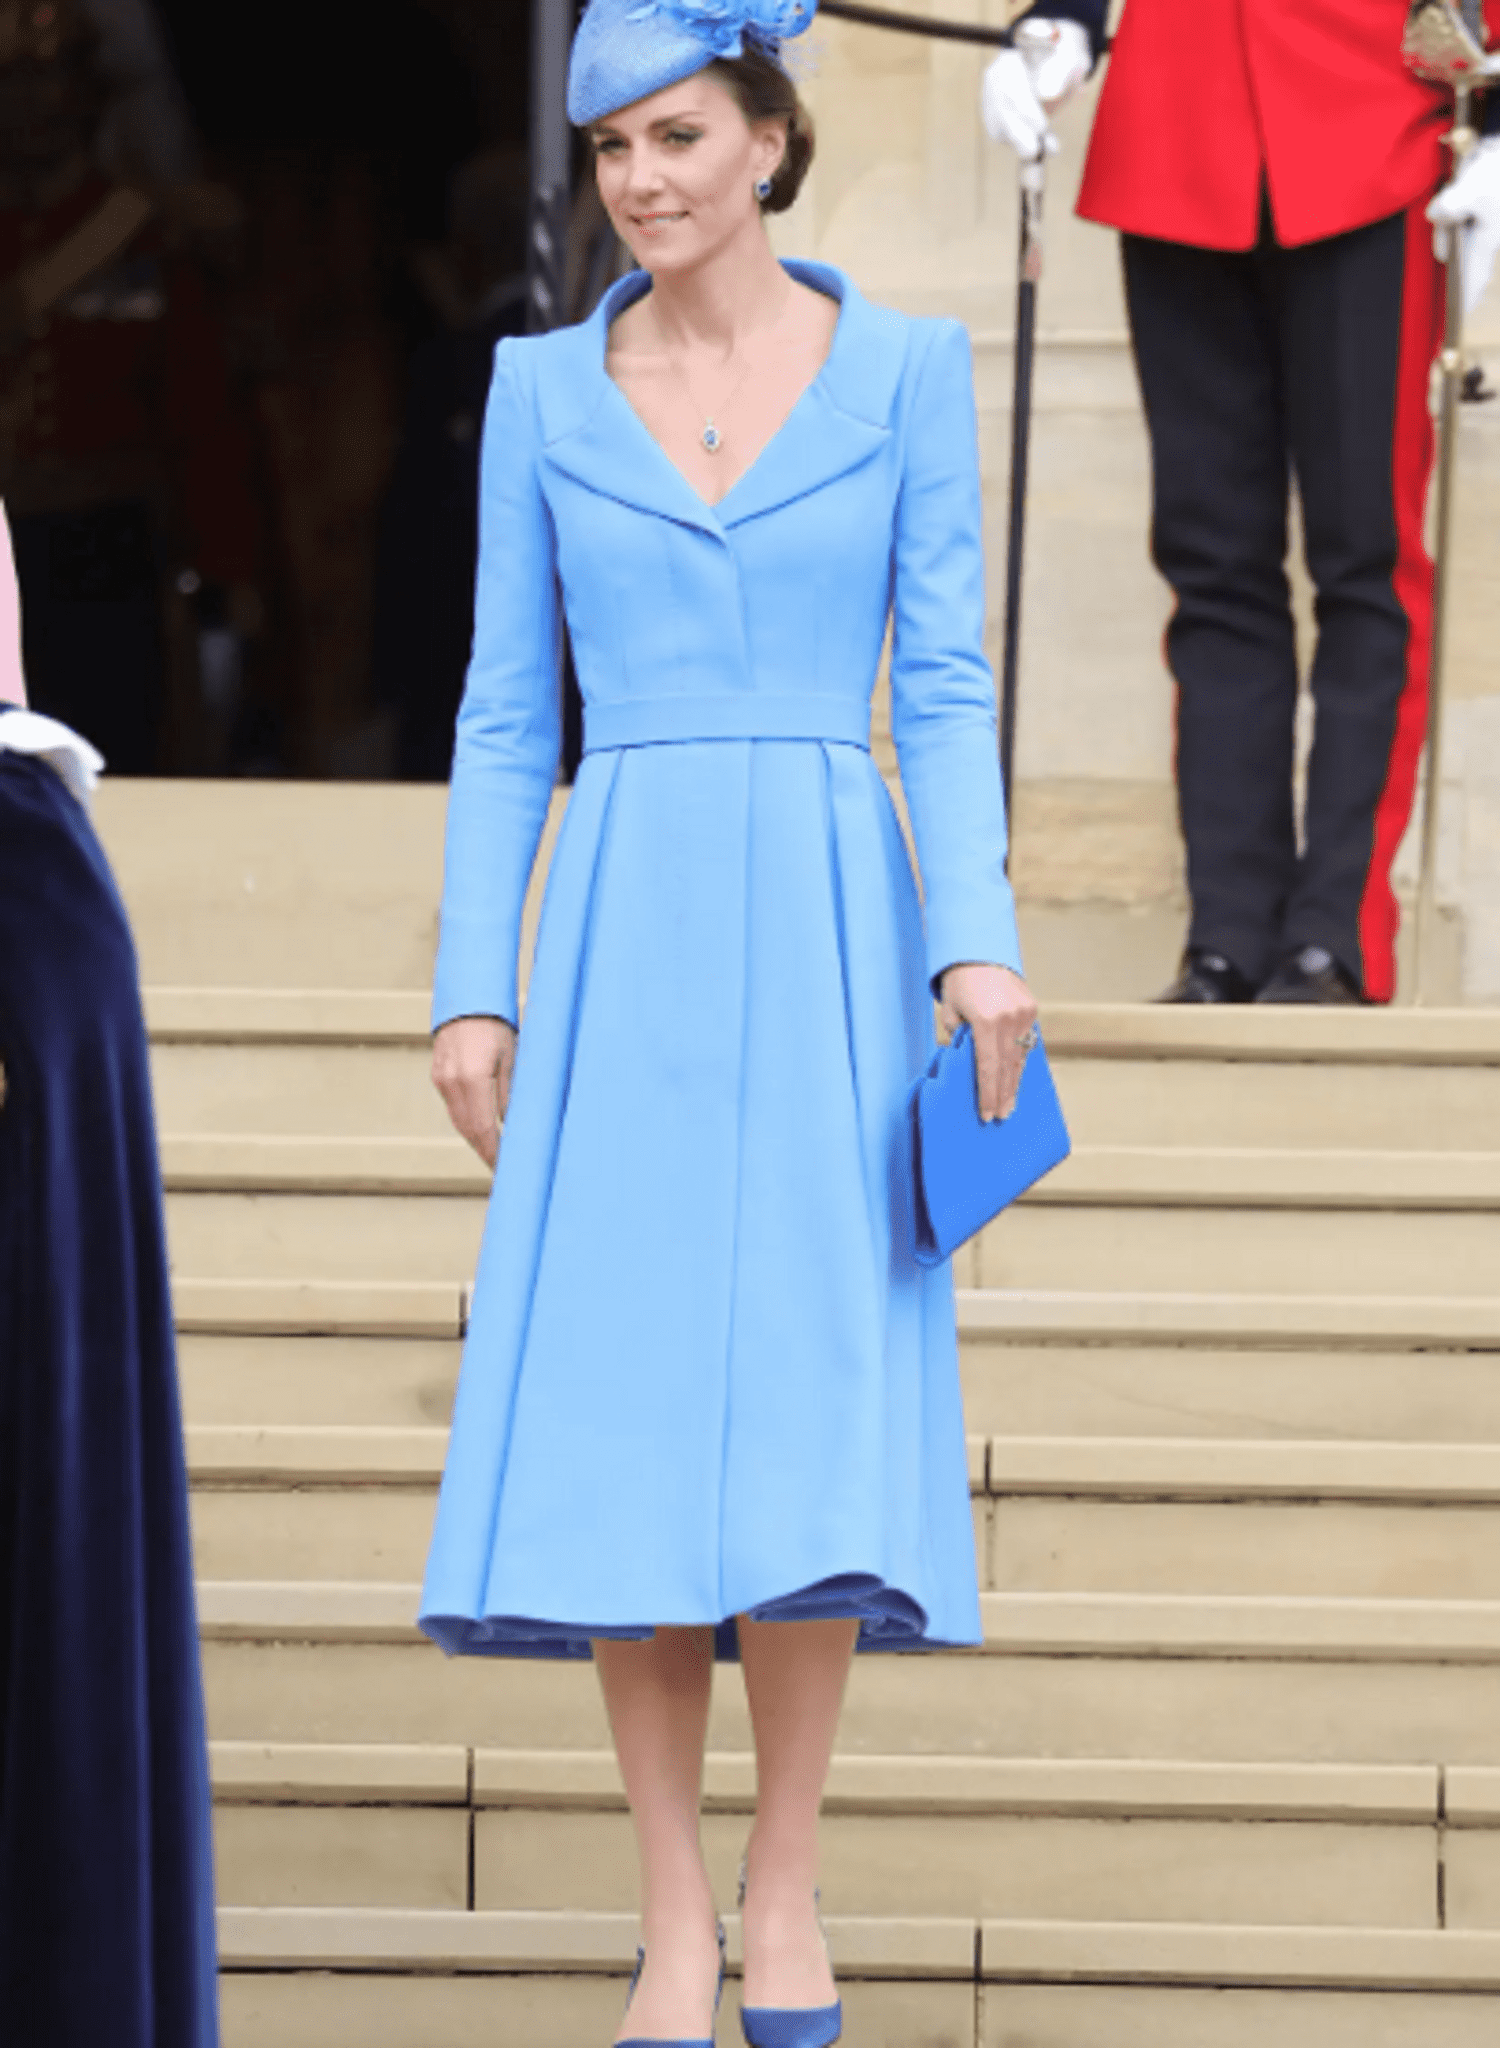 kate-middleton-attends-the-order-of-the-garter-in-bright-blue